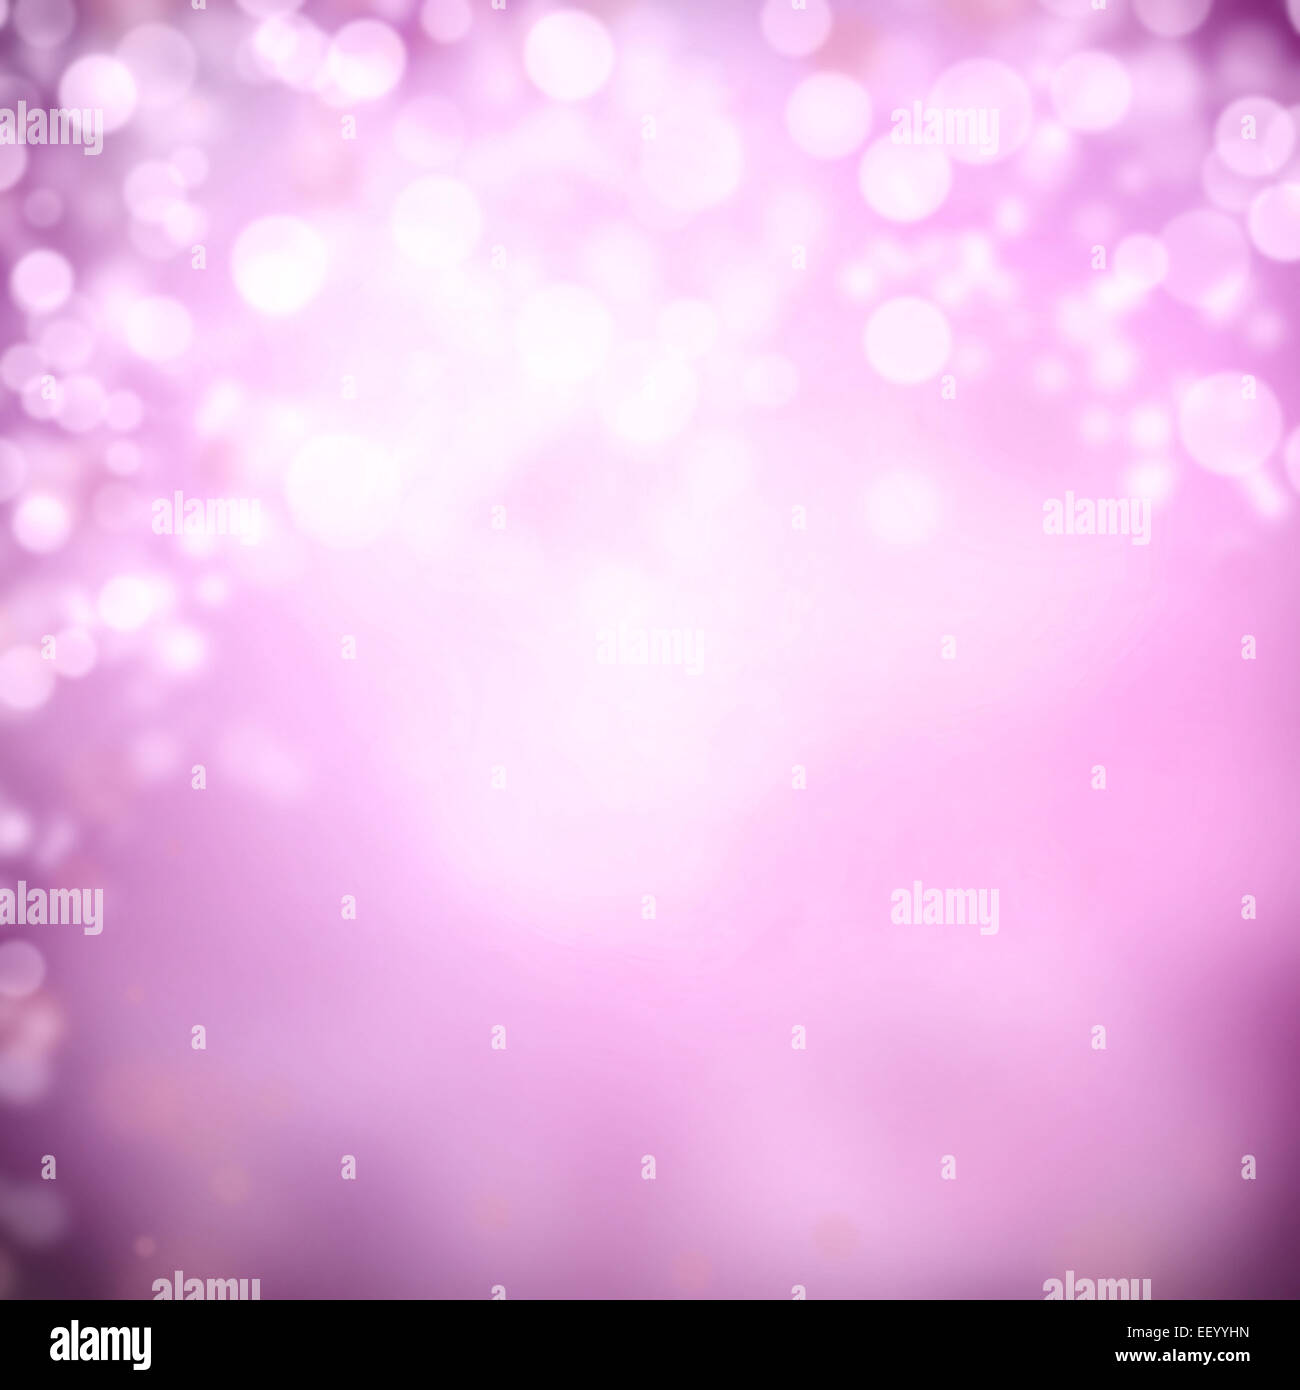 Abstract blurry background with spot lights Stock Photo